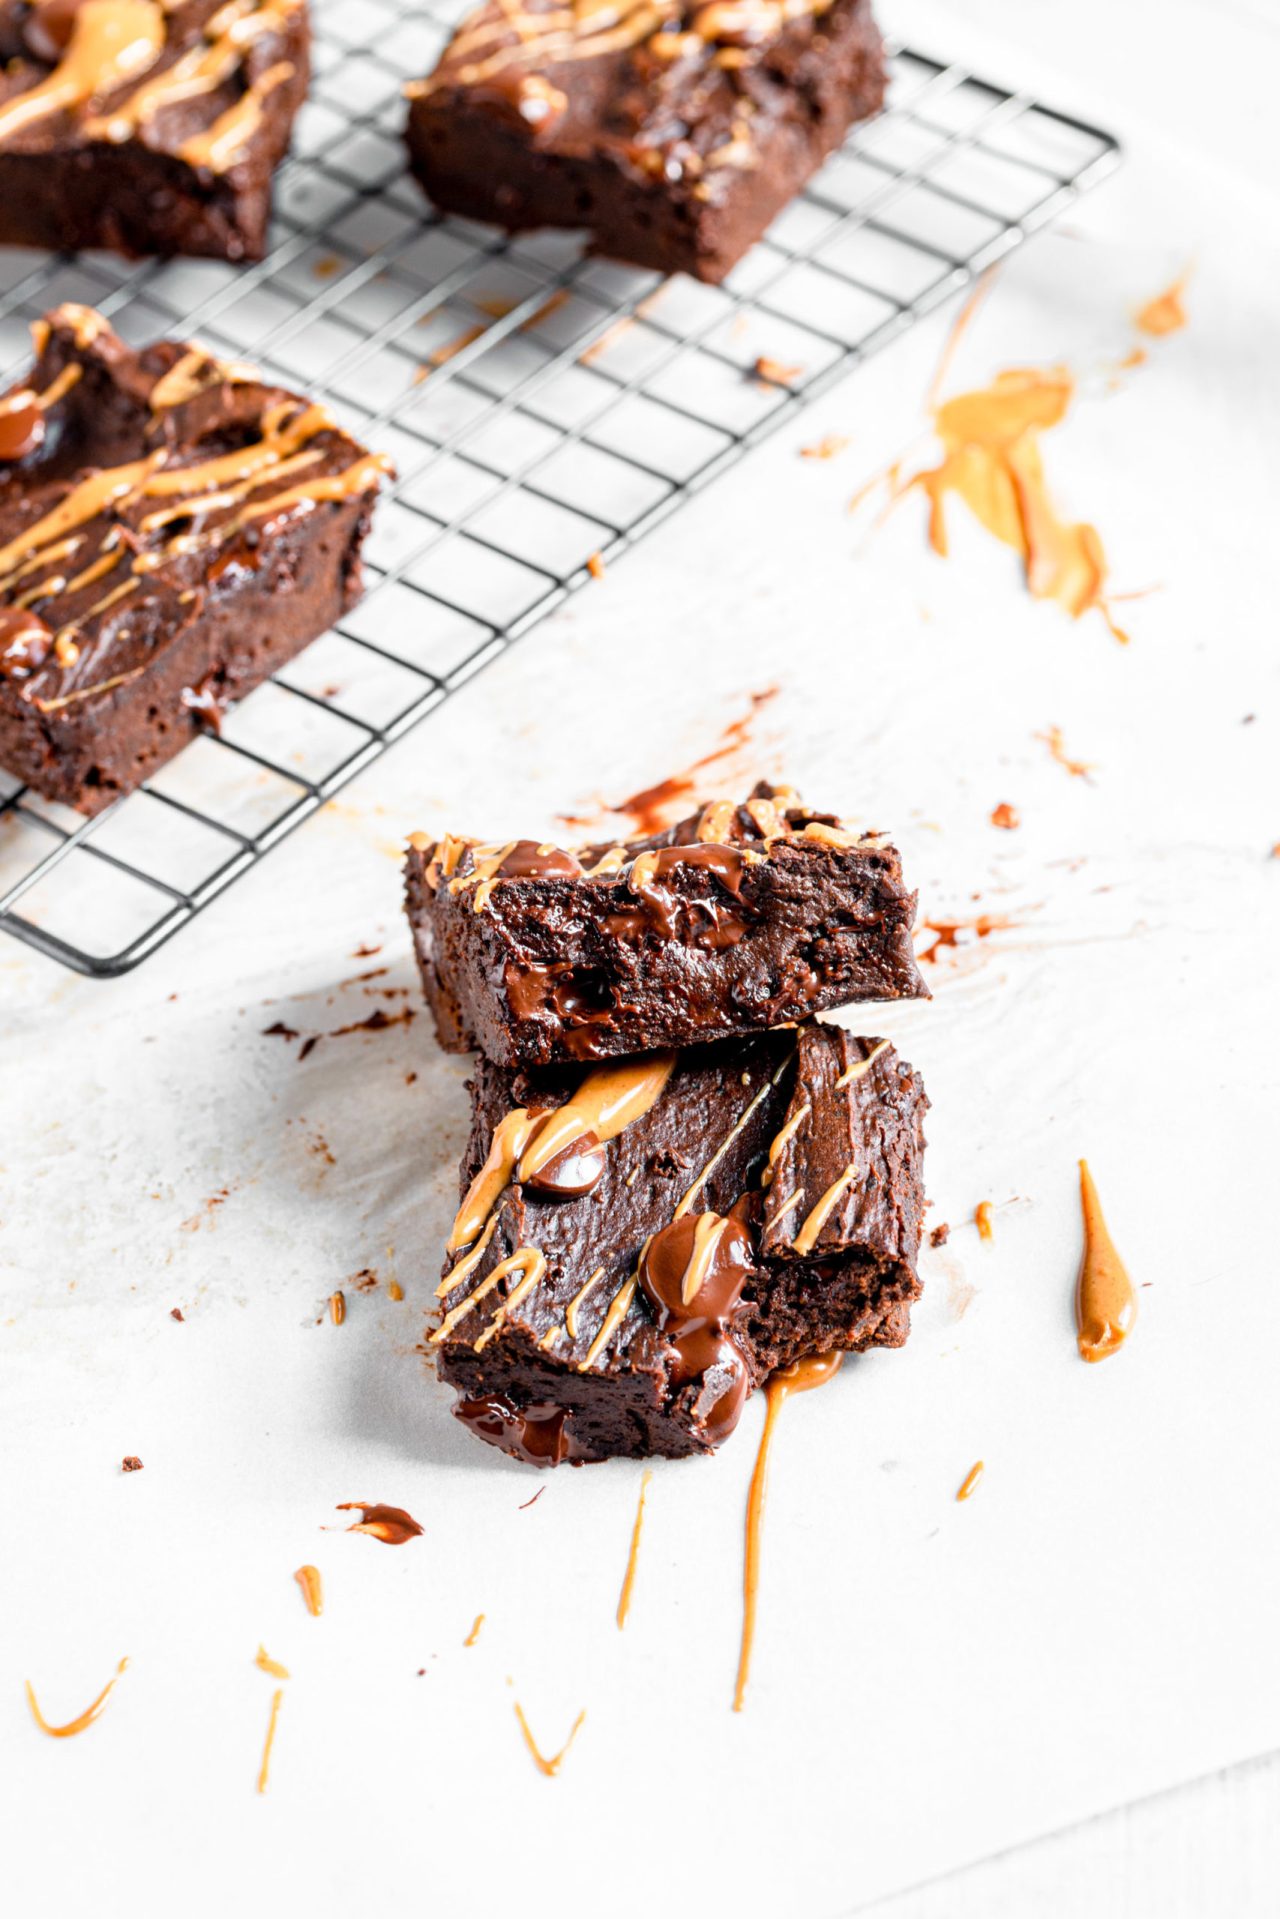 Awesome black bean recipes: These Peanut Butter Black Bean Brownies at Sprinkles and Sea Salt bring the flavor without the sugar crash.